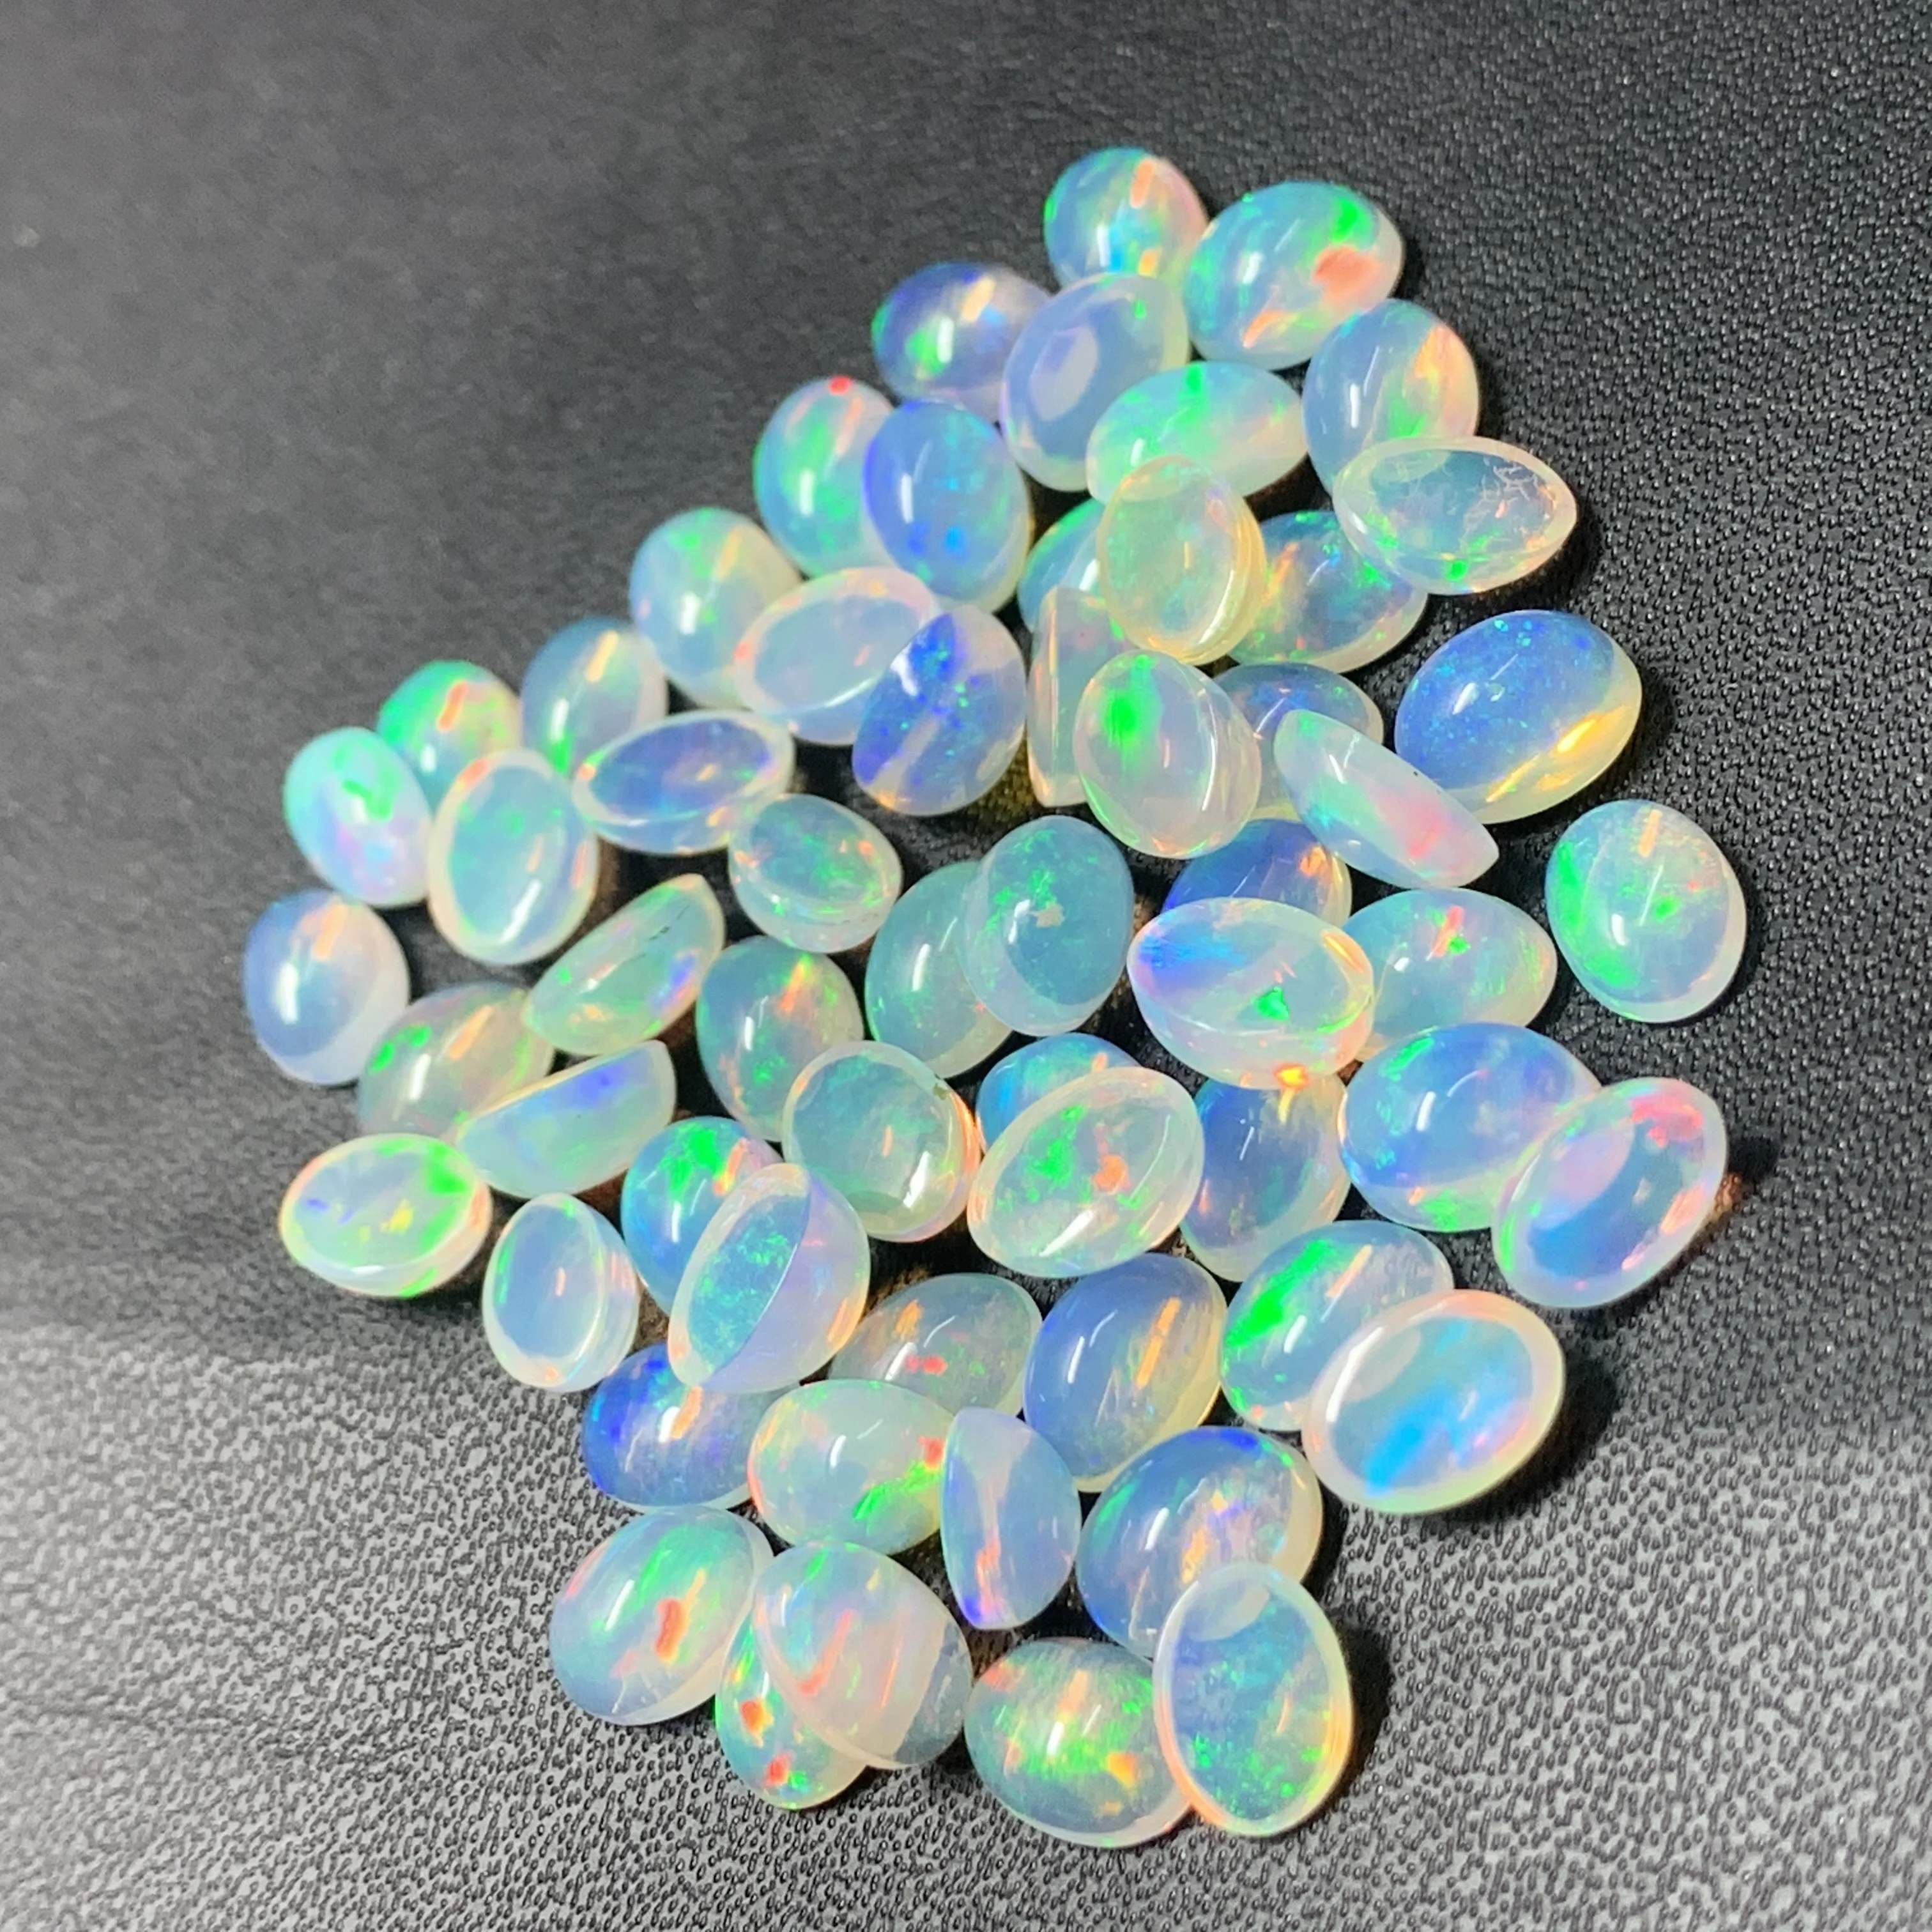 Size 7x8.5-6x10mm,Loose smooth Opal,For Jewelry Making BF-64 Quality Opal Flat Slice Cabochon Fancy 4 PCs,Natural Ethiopian Opal,AAA